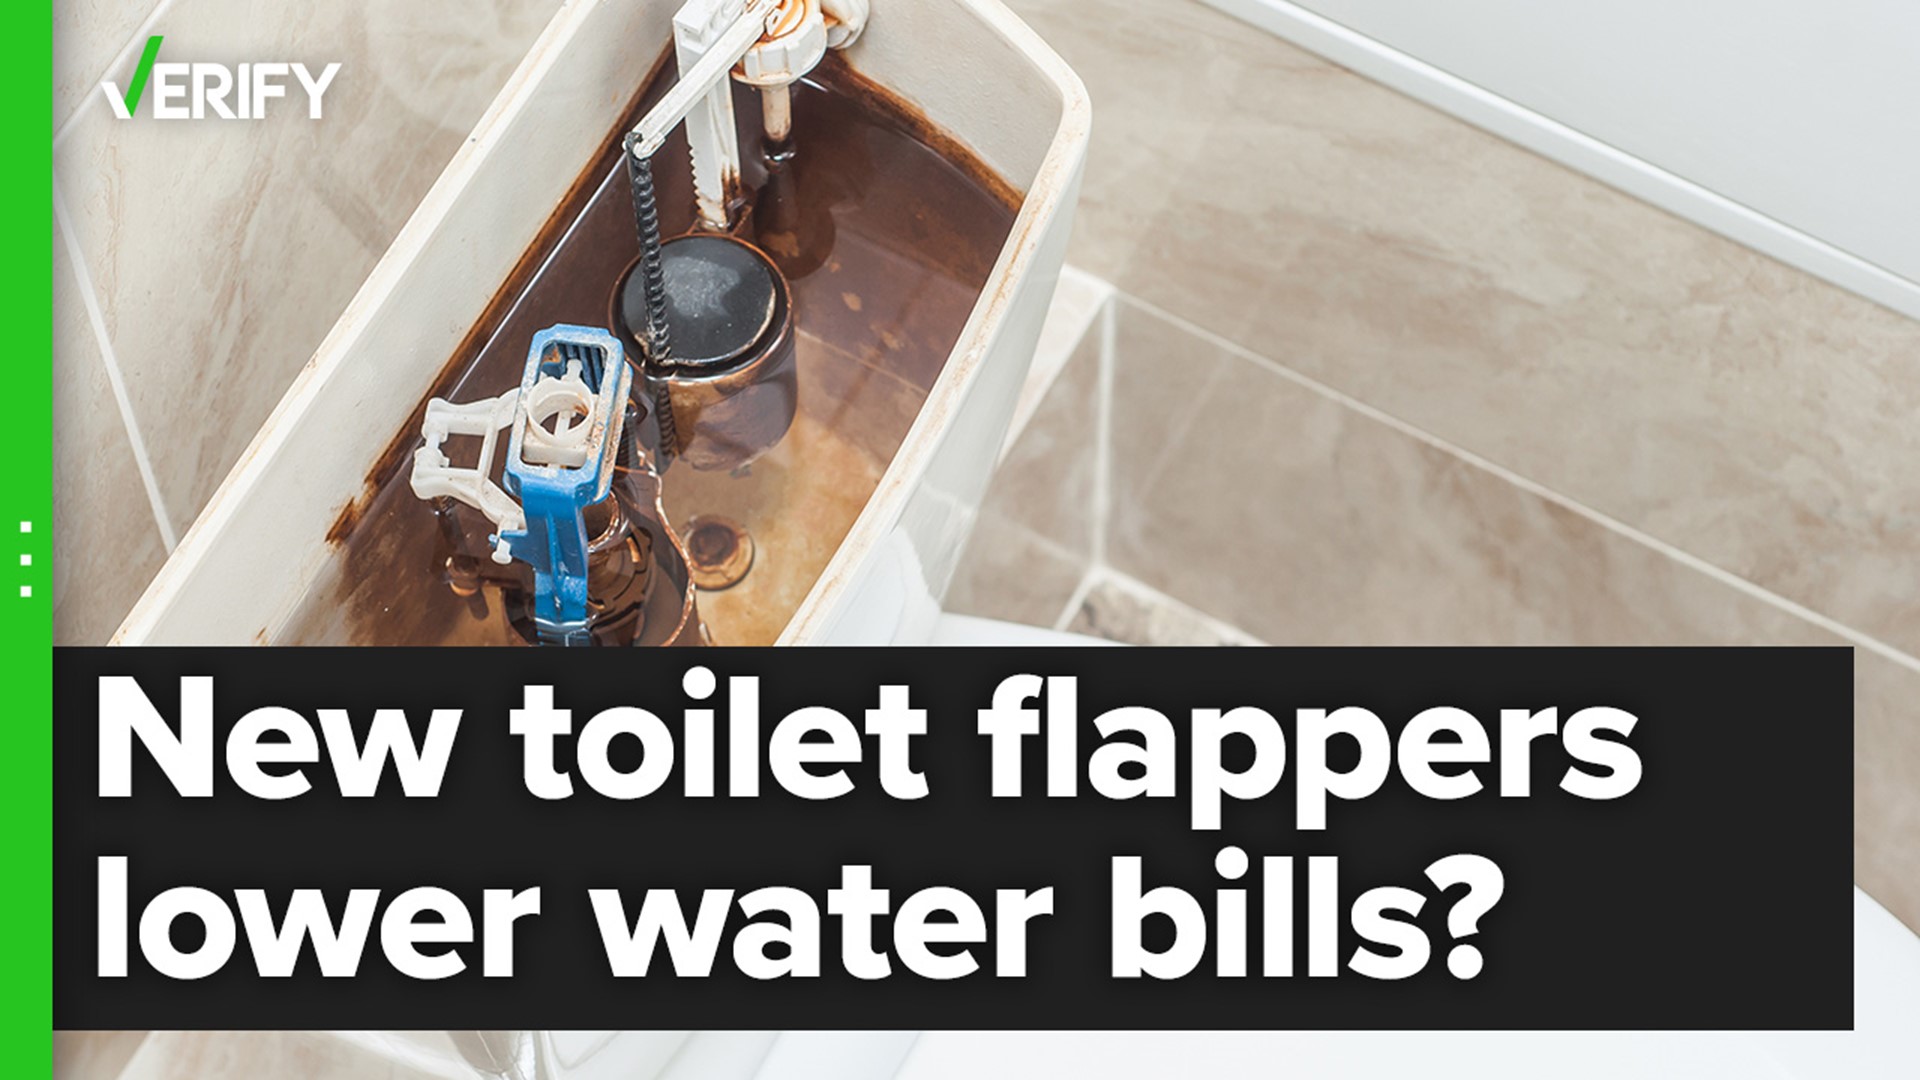 A leaky flapper, which controls how much water from the toilet tank goes into the bowl, can waste gallons of water between flushes.